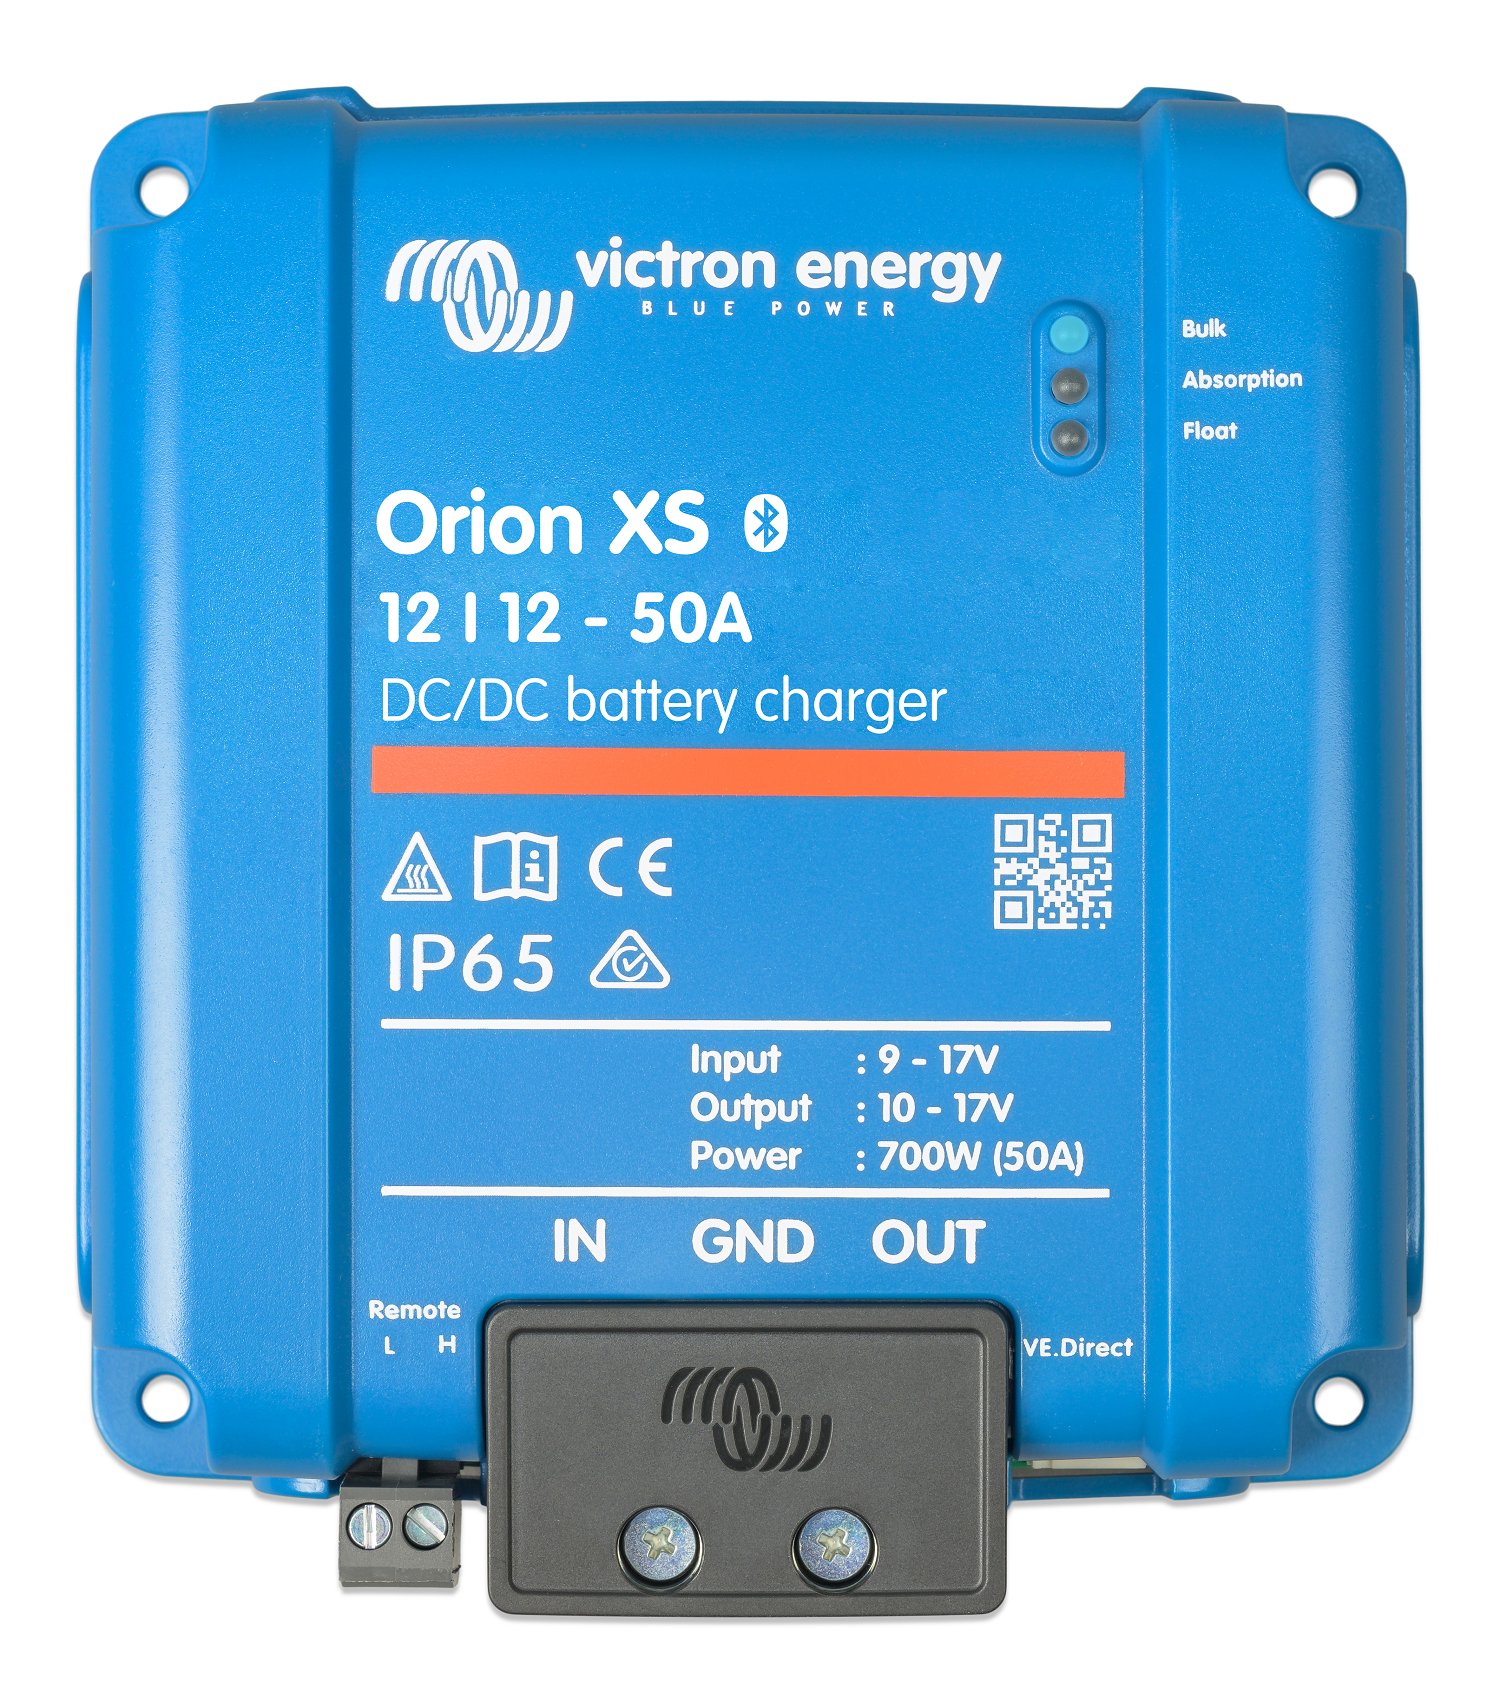 Does the Victron Orion XS have automatic engine-shutdown detection?